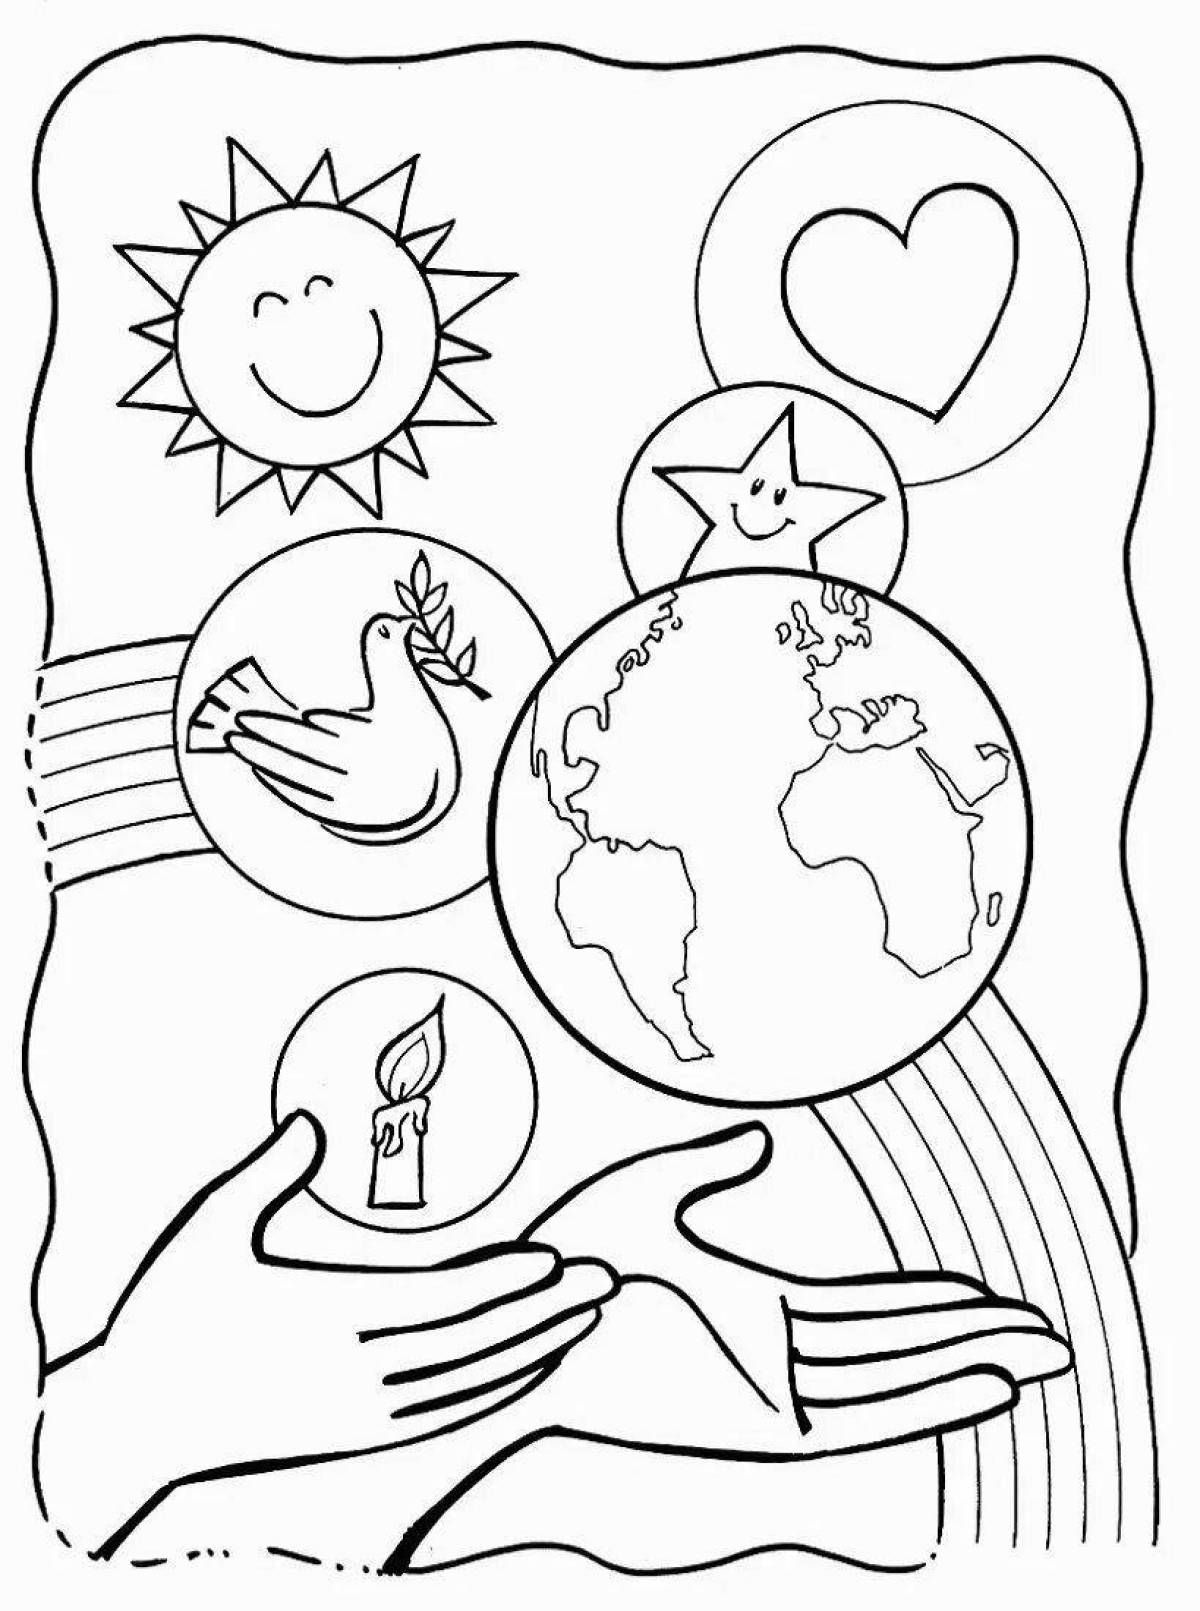 Coloring book full of hope a world without war